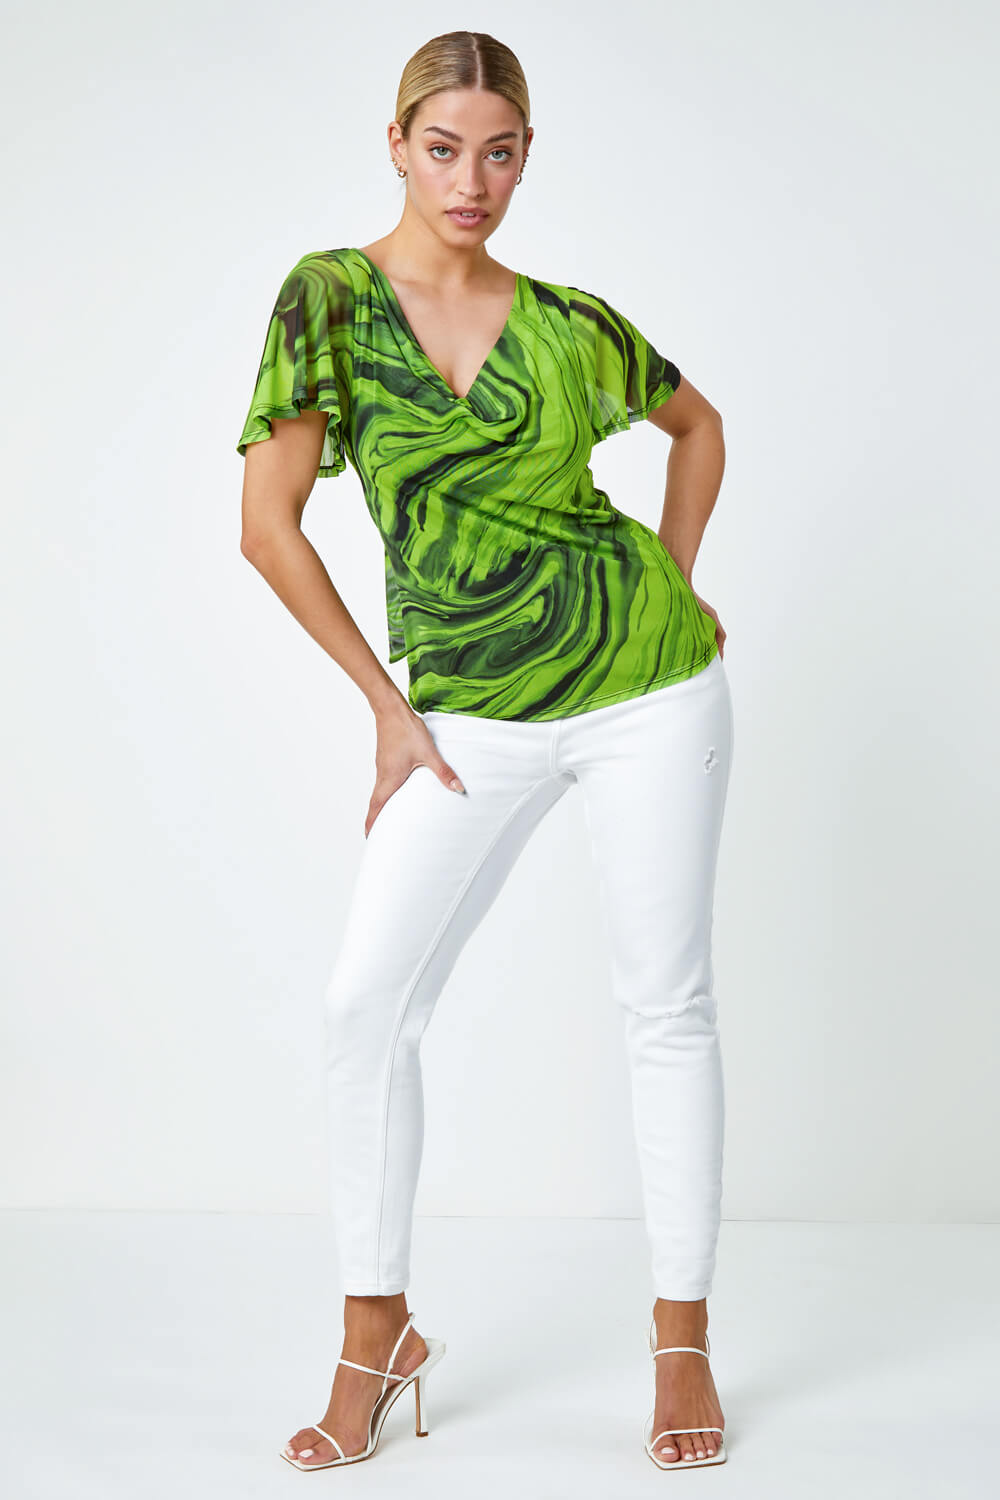 Green Swirl Print Stretch Cut Out Top, Image 4 of 5